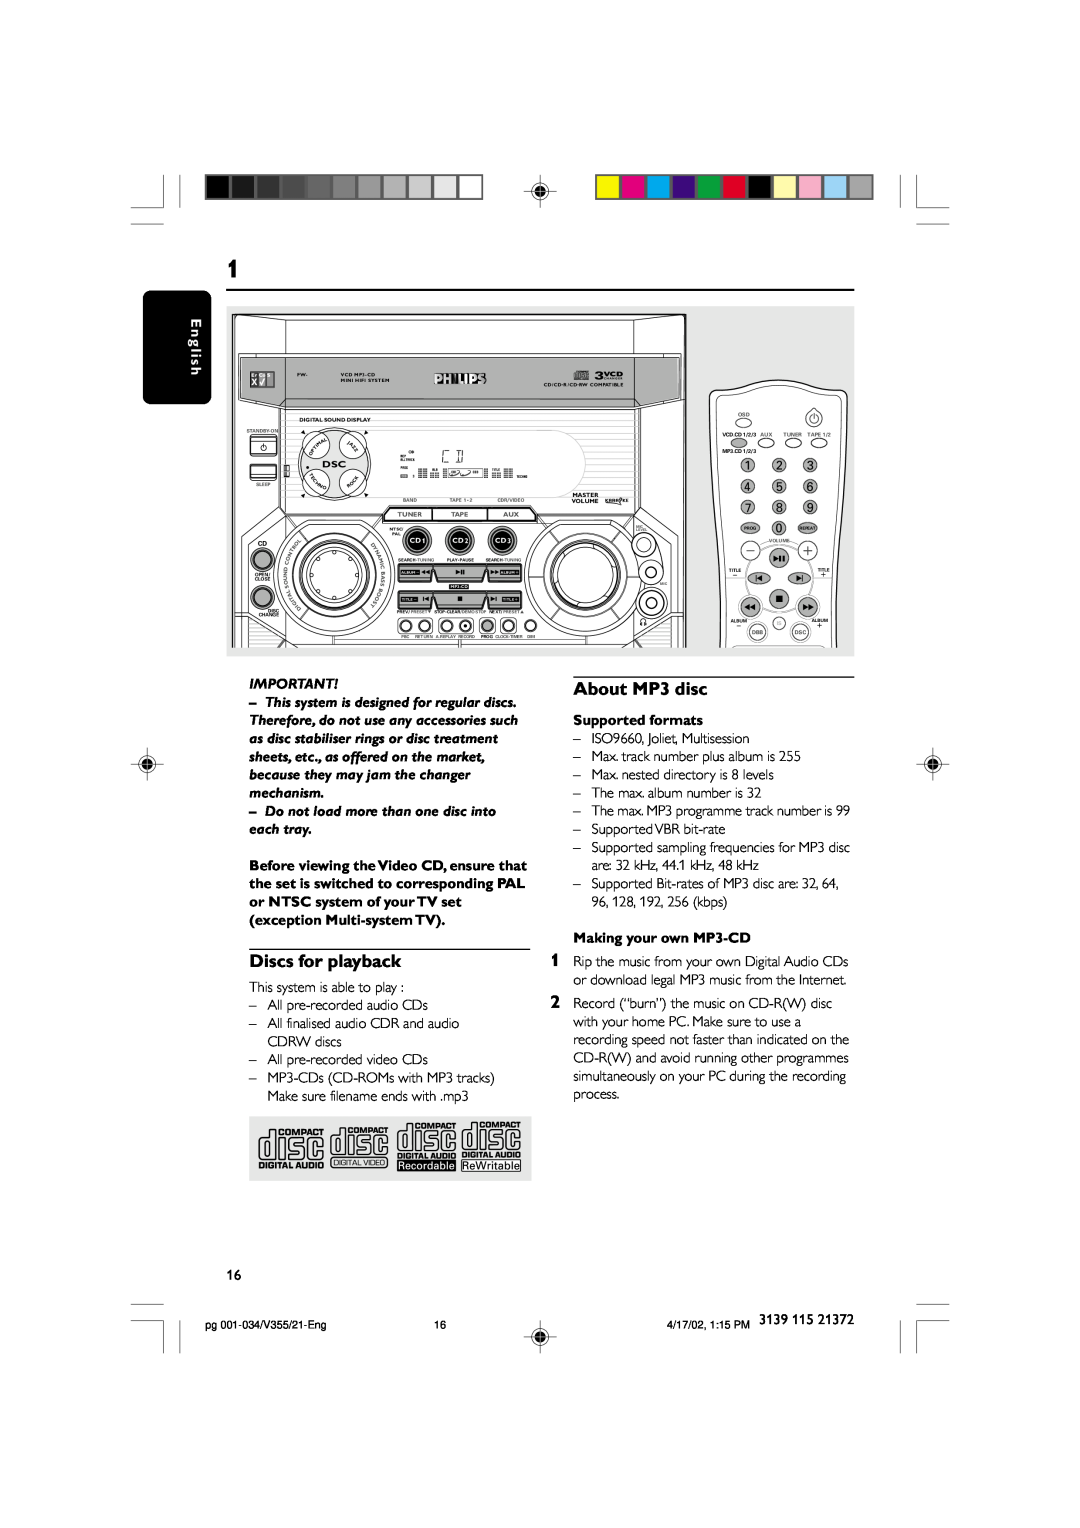 Philips FW-V355 manual About MP3 disc, Discs for playback, E n g l i s h, Supported formats, Making your own MP3-CD 